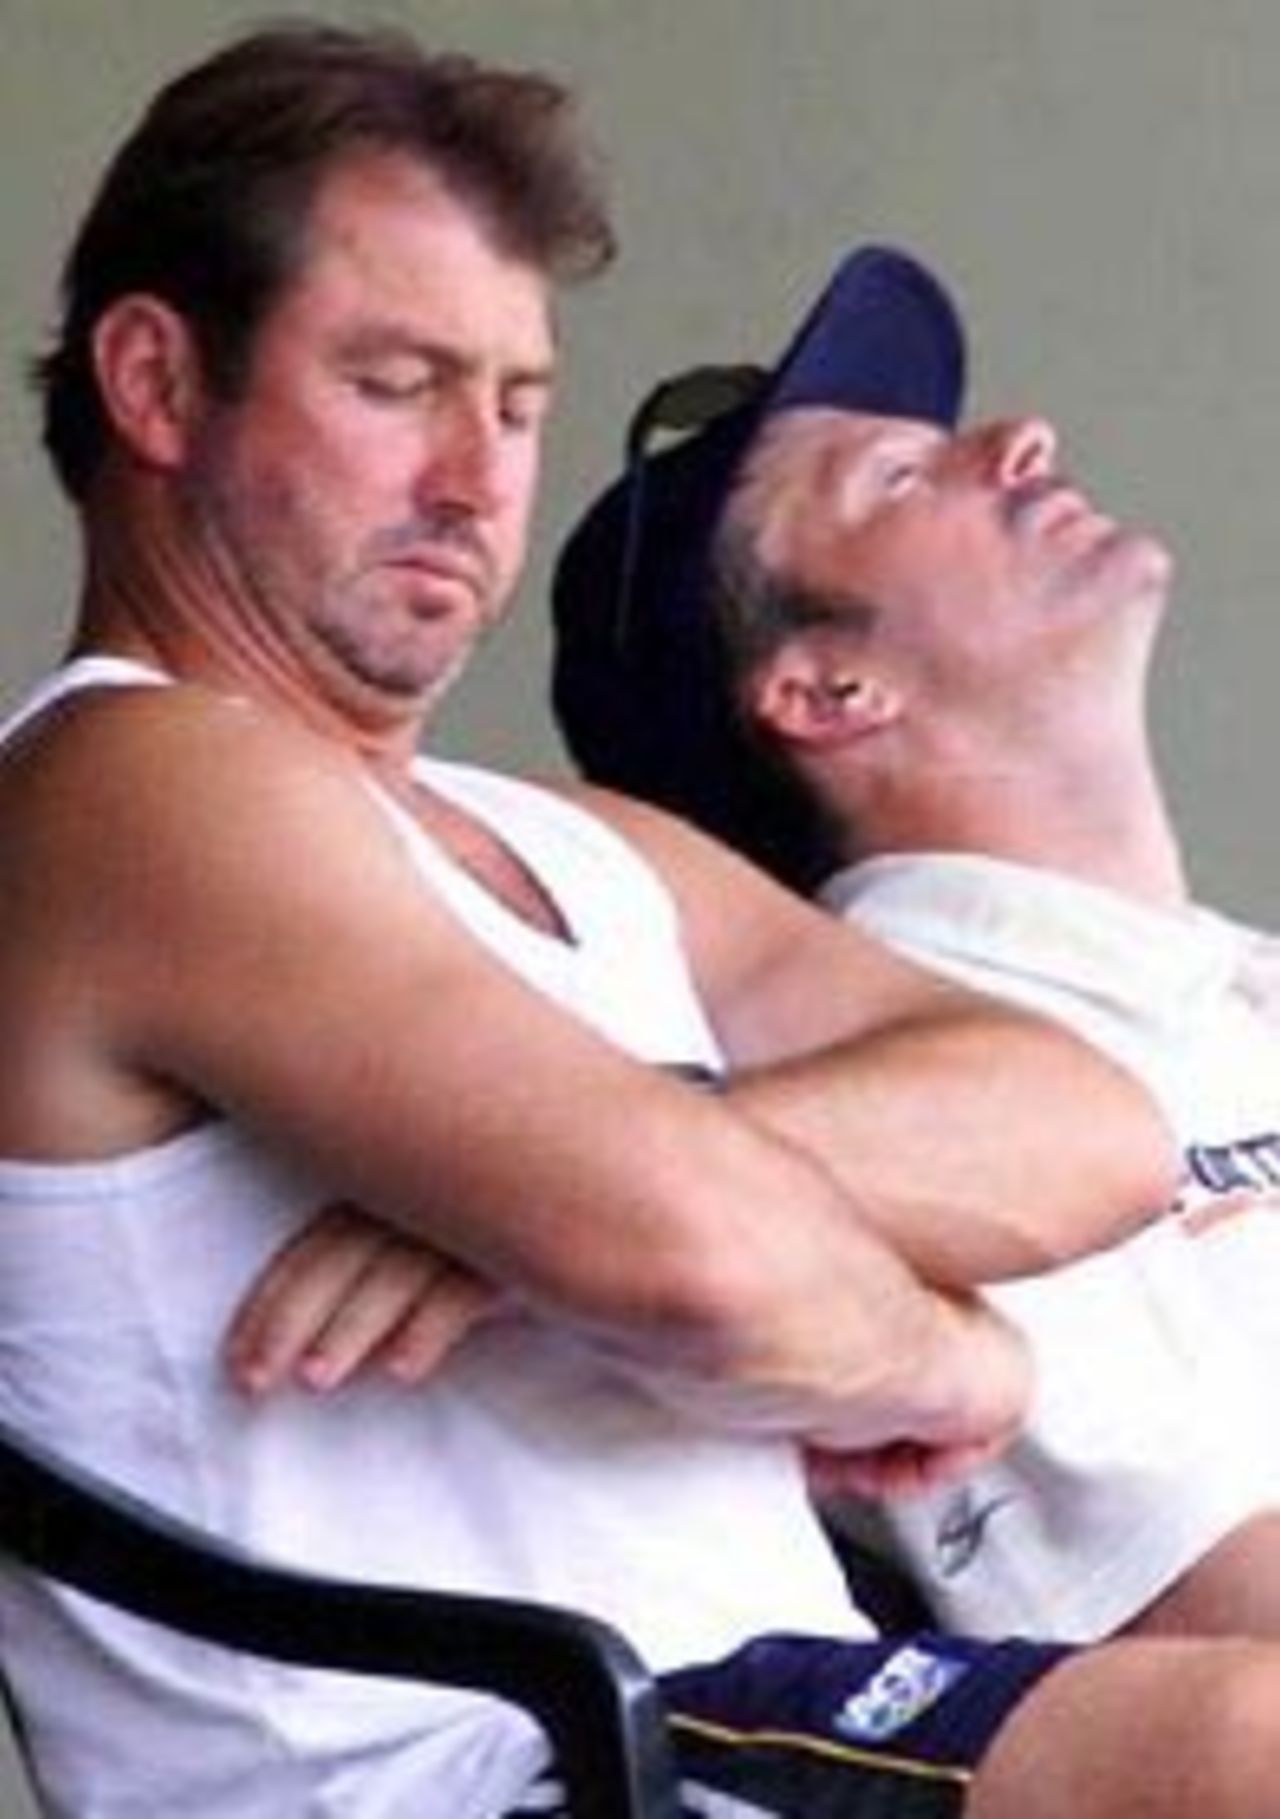 9 Sep 1999: Australian captain Steve Waugh (right) shows the strain while sitting in the dressing room with coach Geoff Marsh, during day one of the First Test between Sri Lanka and Australia at Asgiriya Stadium, Kandy, Sri Lanka.